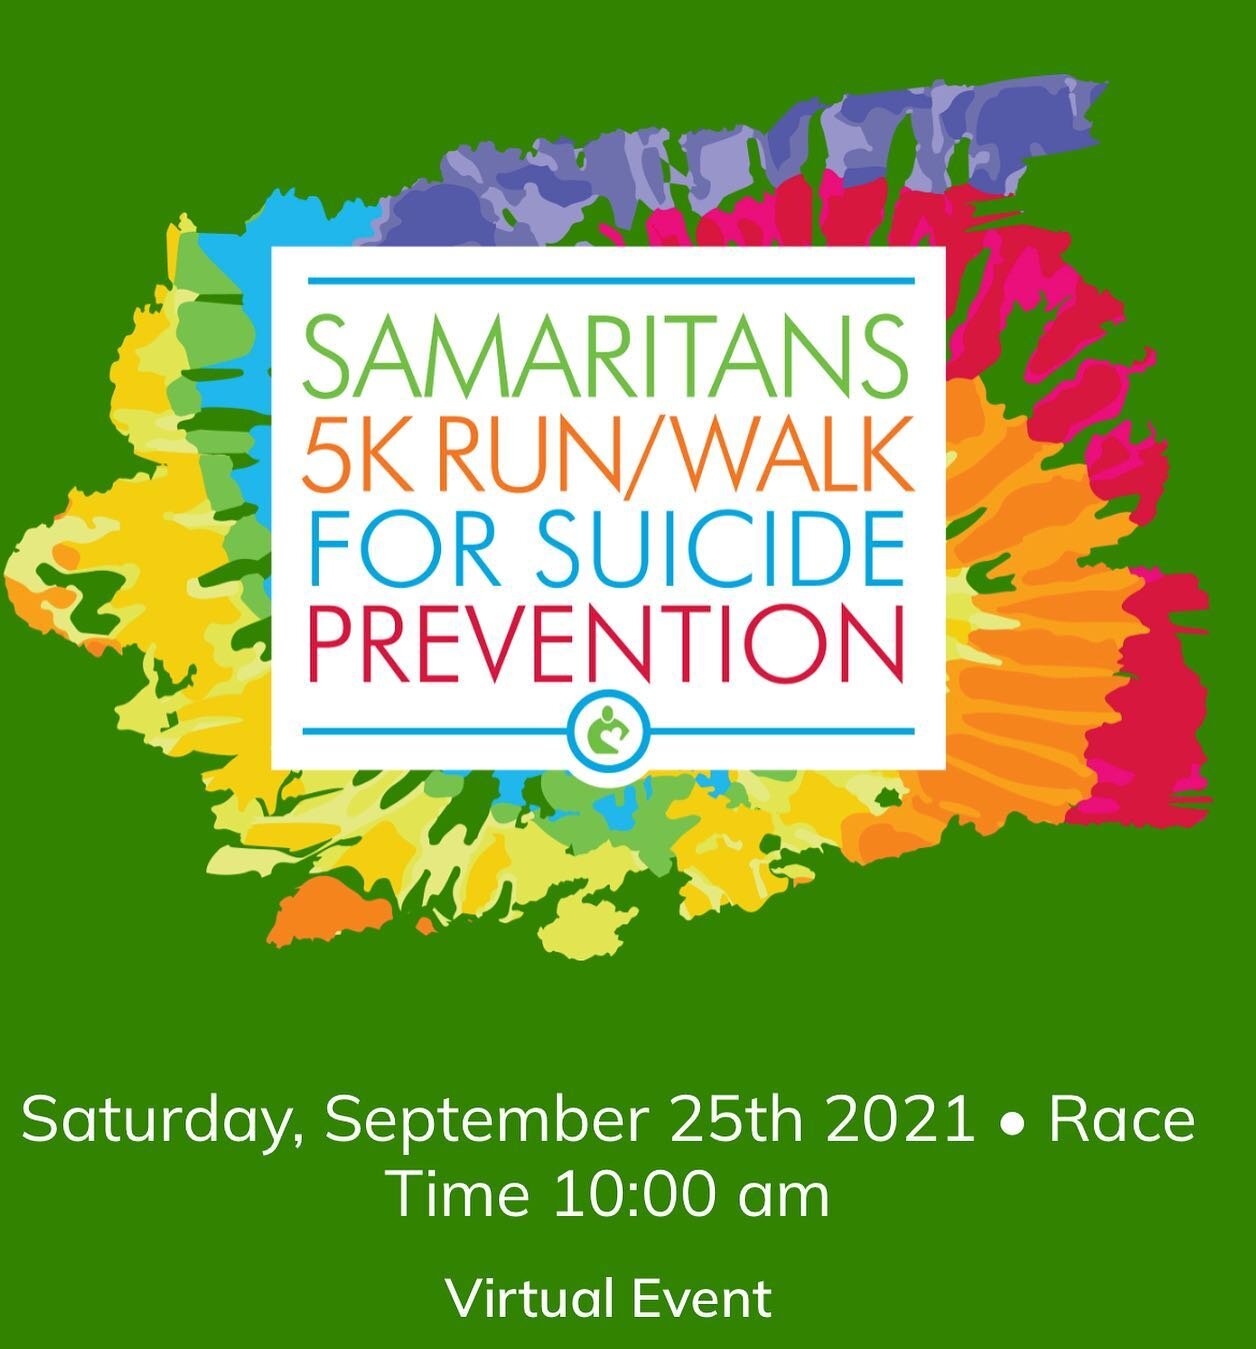 Good Luck to the amazing @samaritanshope team tomorrow as I am sure their 5k will go off without a hitch! I am honored to work with such a great group of dedicated individuals working to prevent, educate, and dispel the stigma associated with suicide